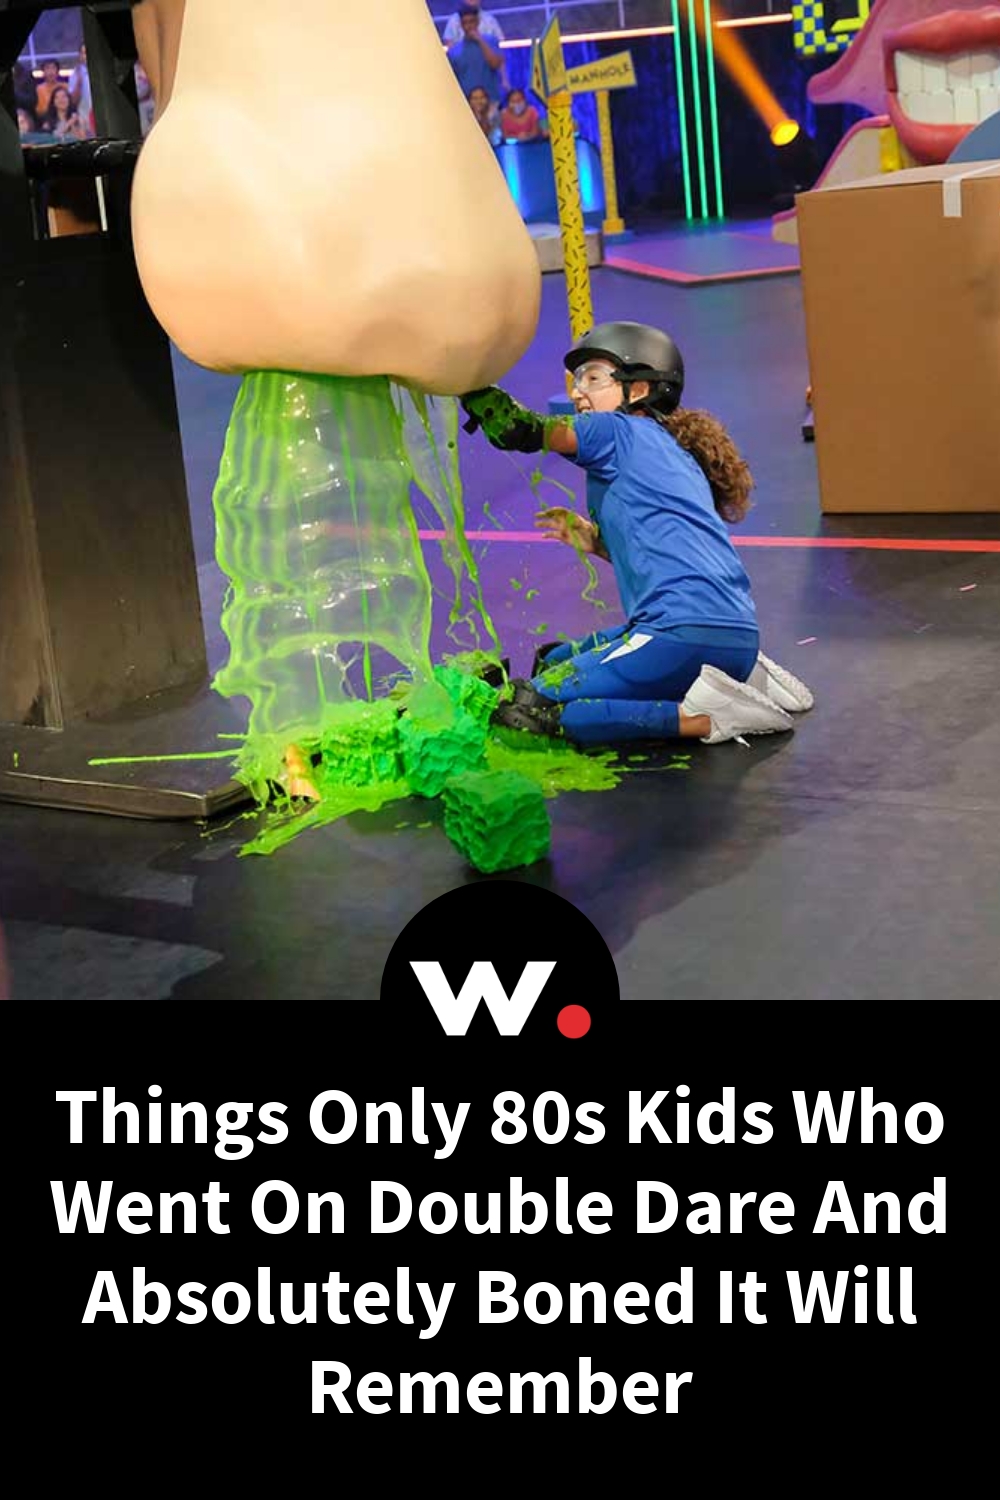 Things Only 80s Kids Who Went On Double Dare And Absolutely Boned It Will Remember